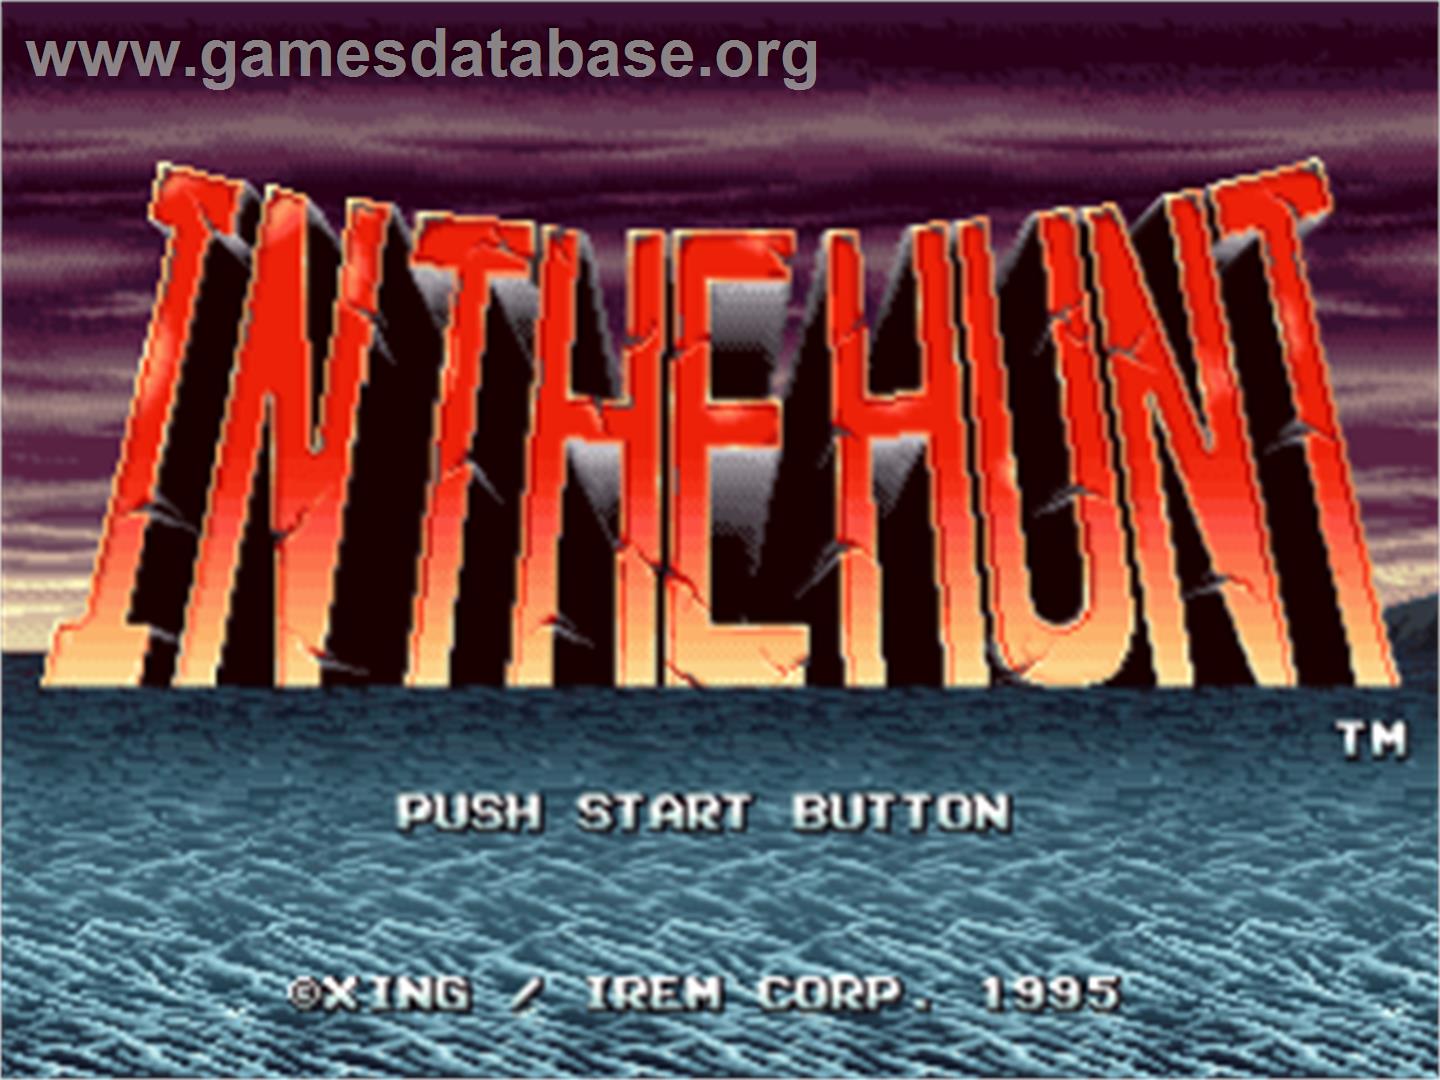 In the Hunt - Sony Playstation - Artwork - Title Screen